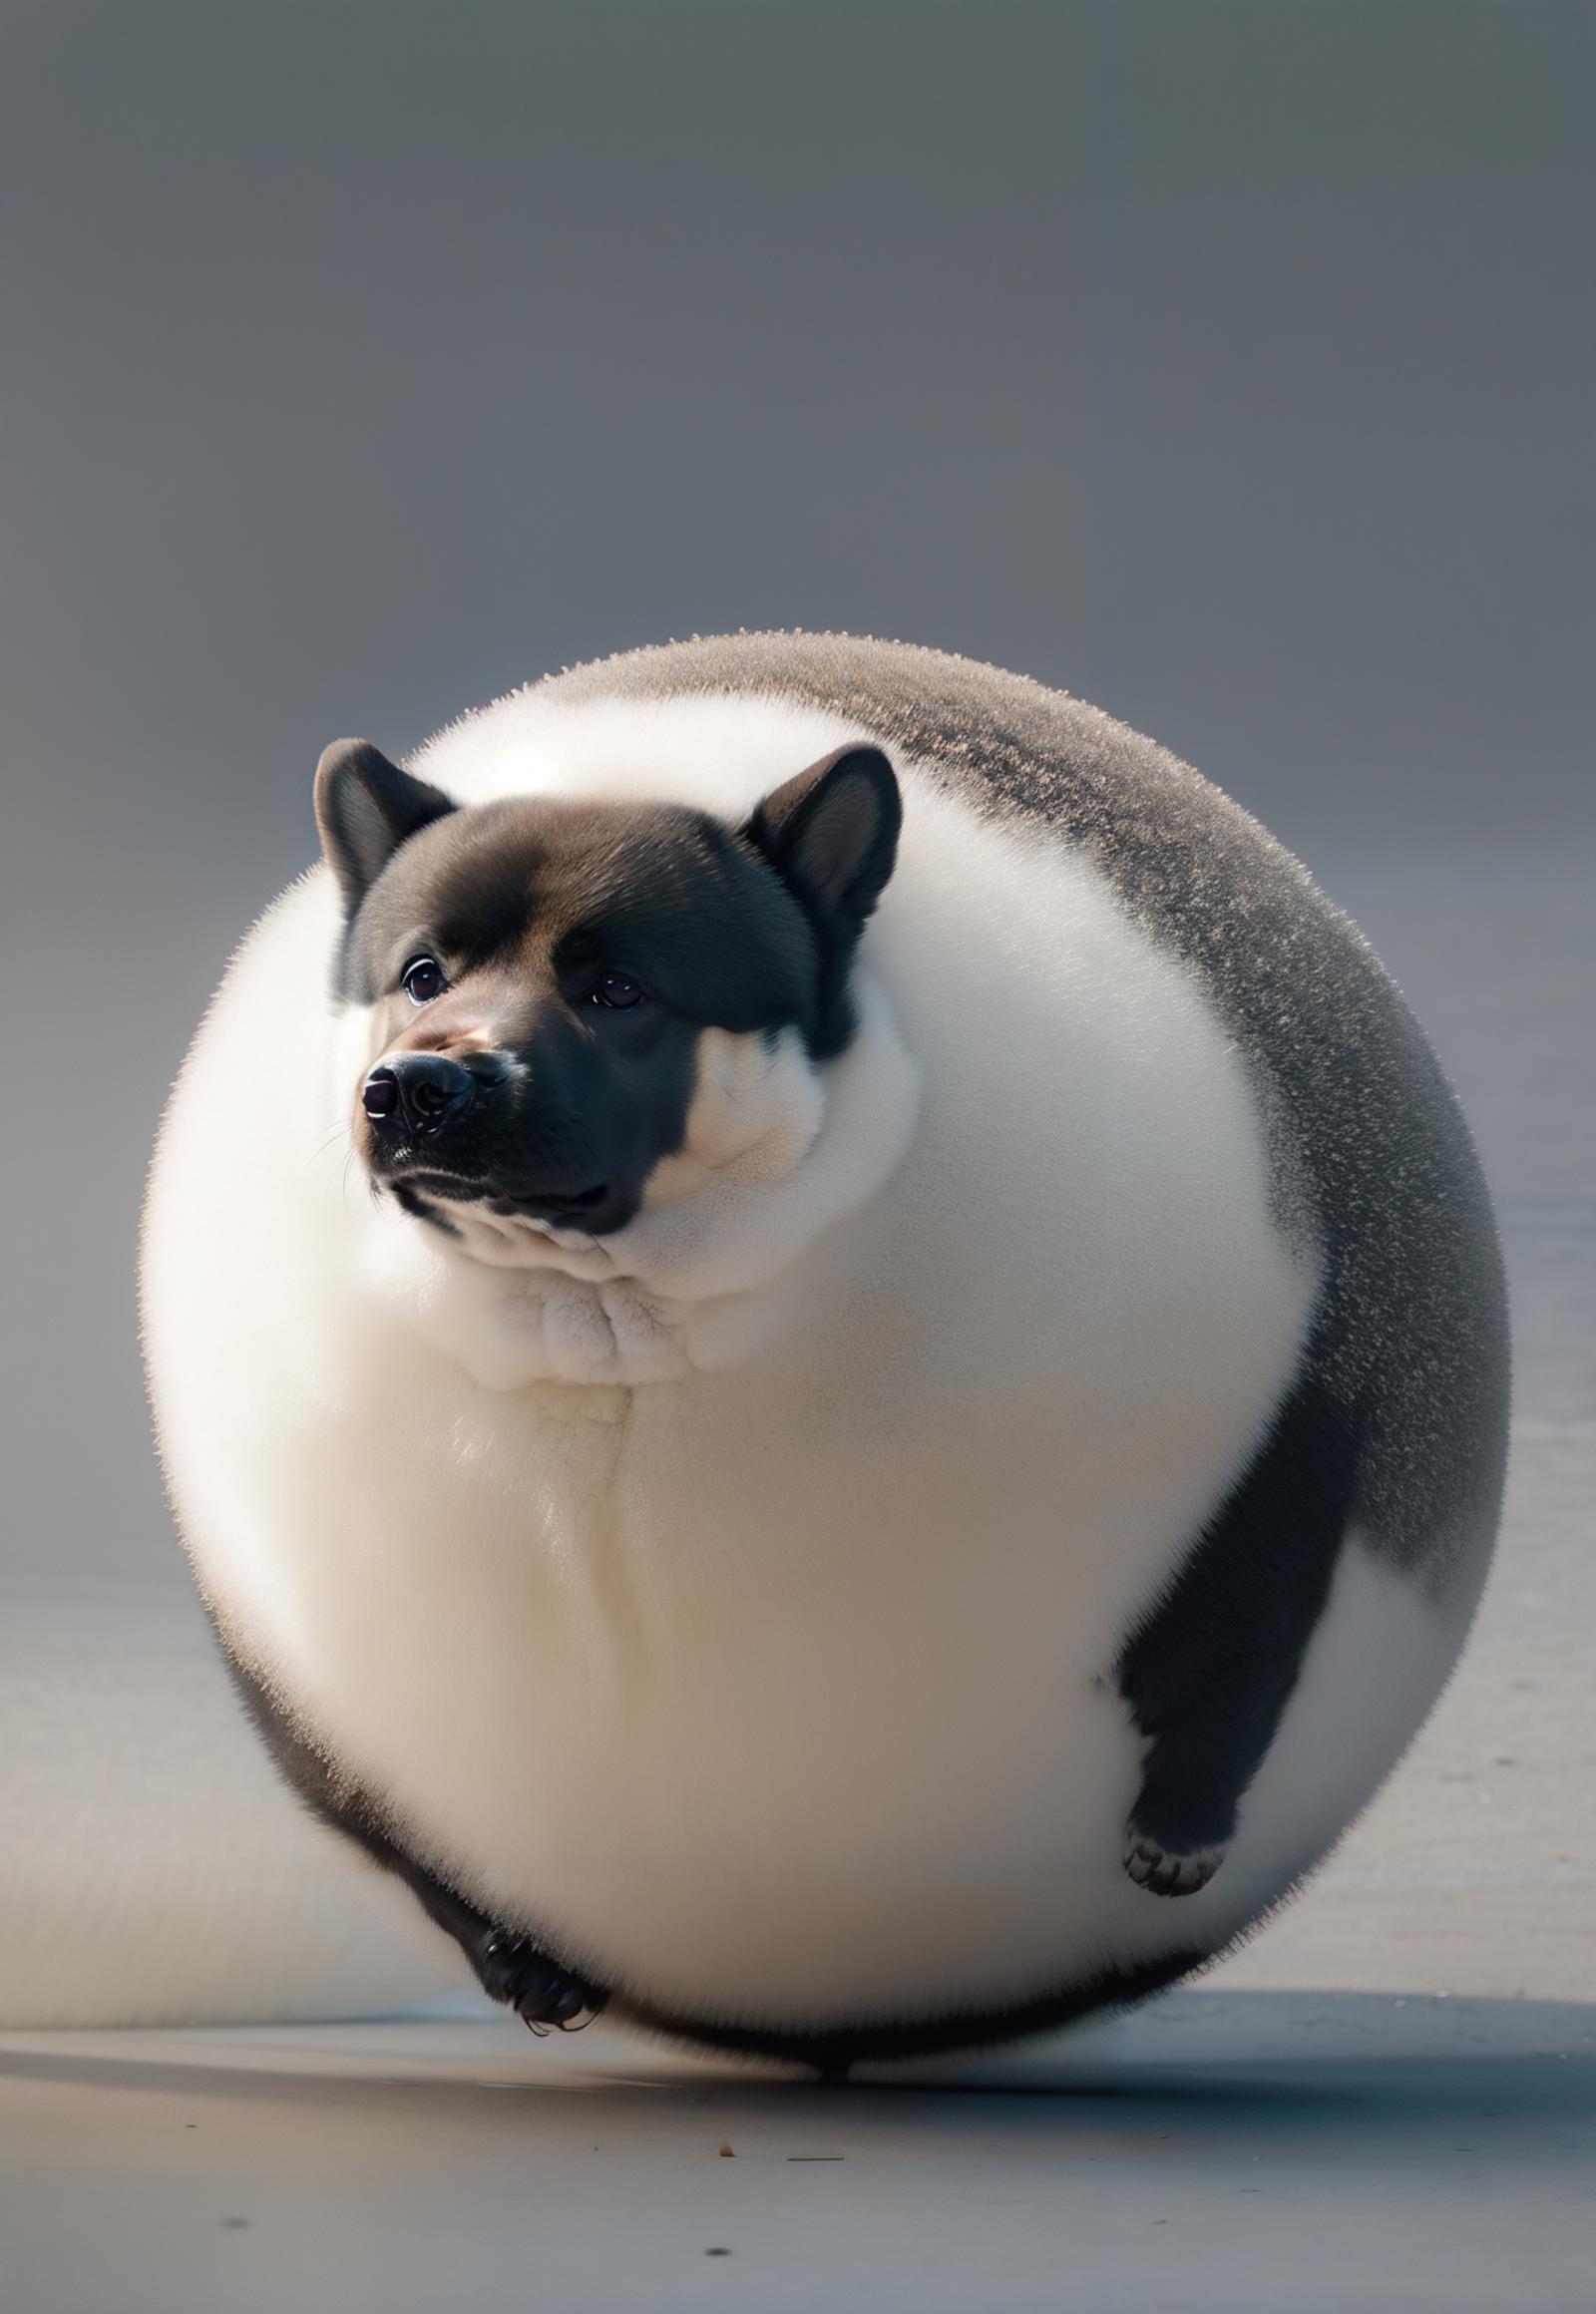 A chubby black and white dog walking on the floor.